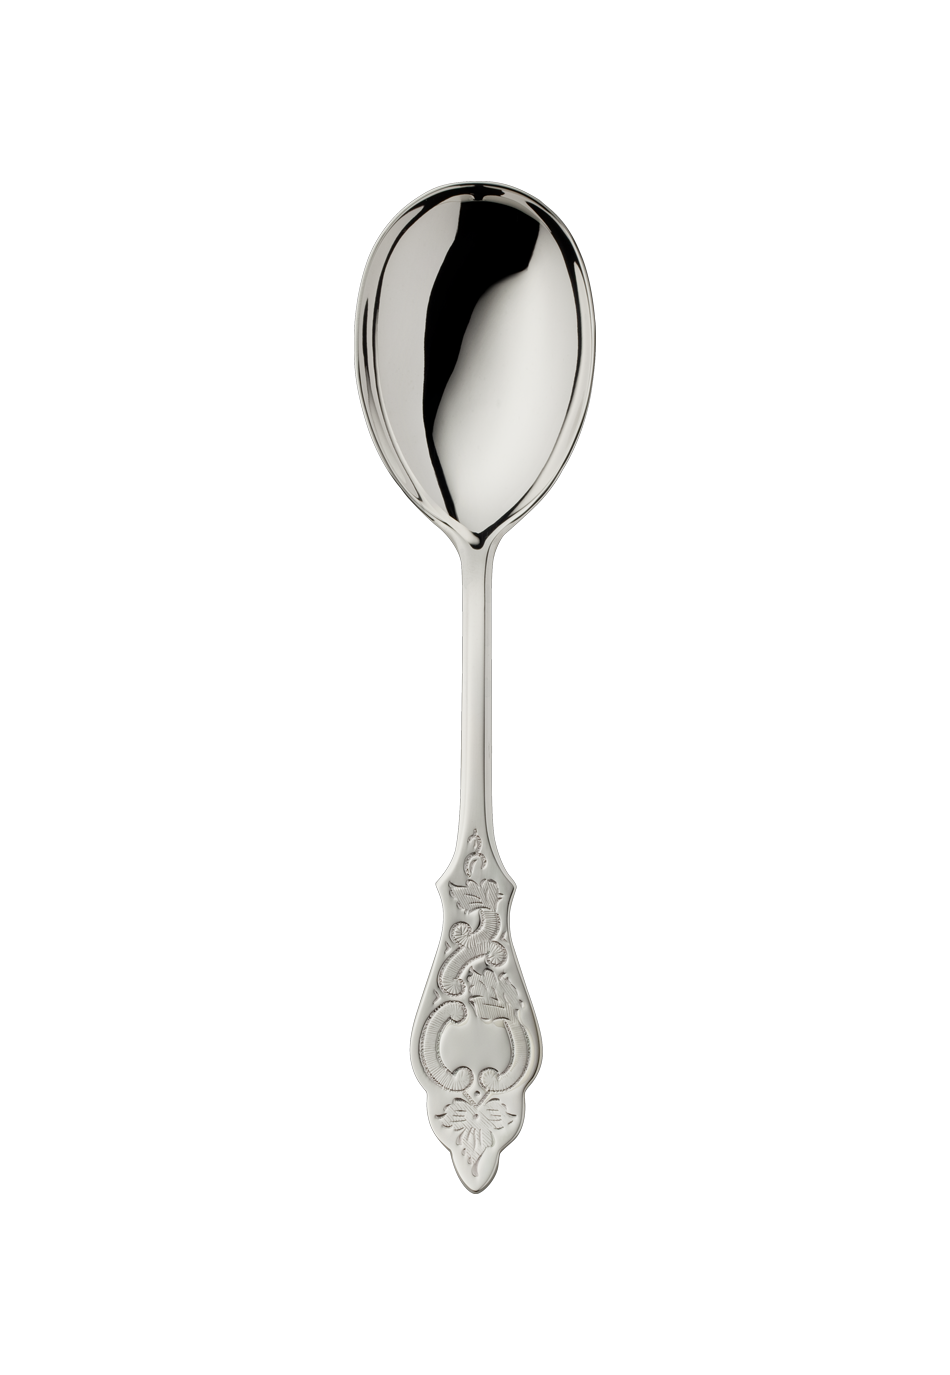 Ostfriesen Compote/Salad Serving Spoon, large (150g massive silverplated)